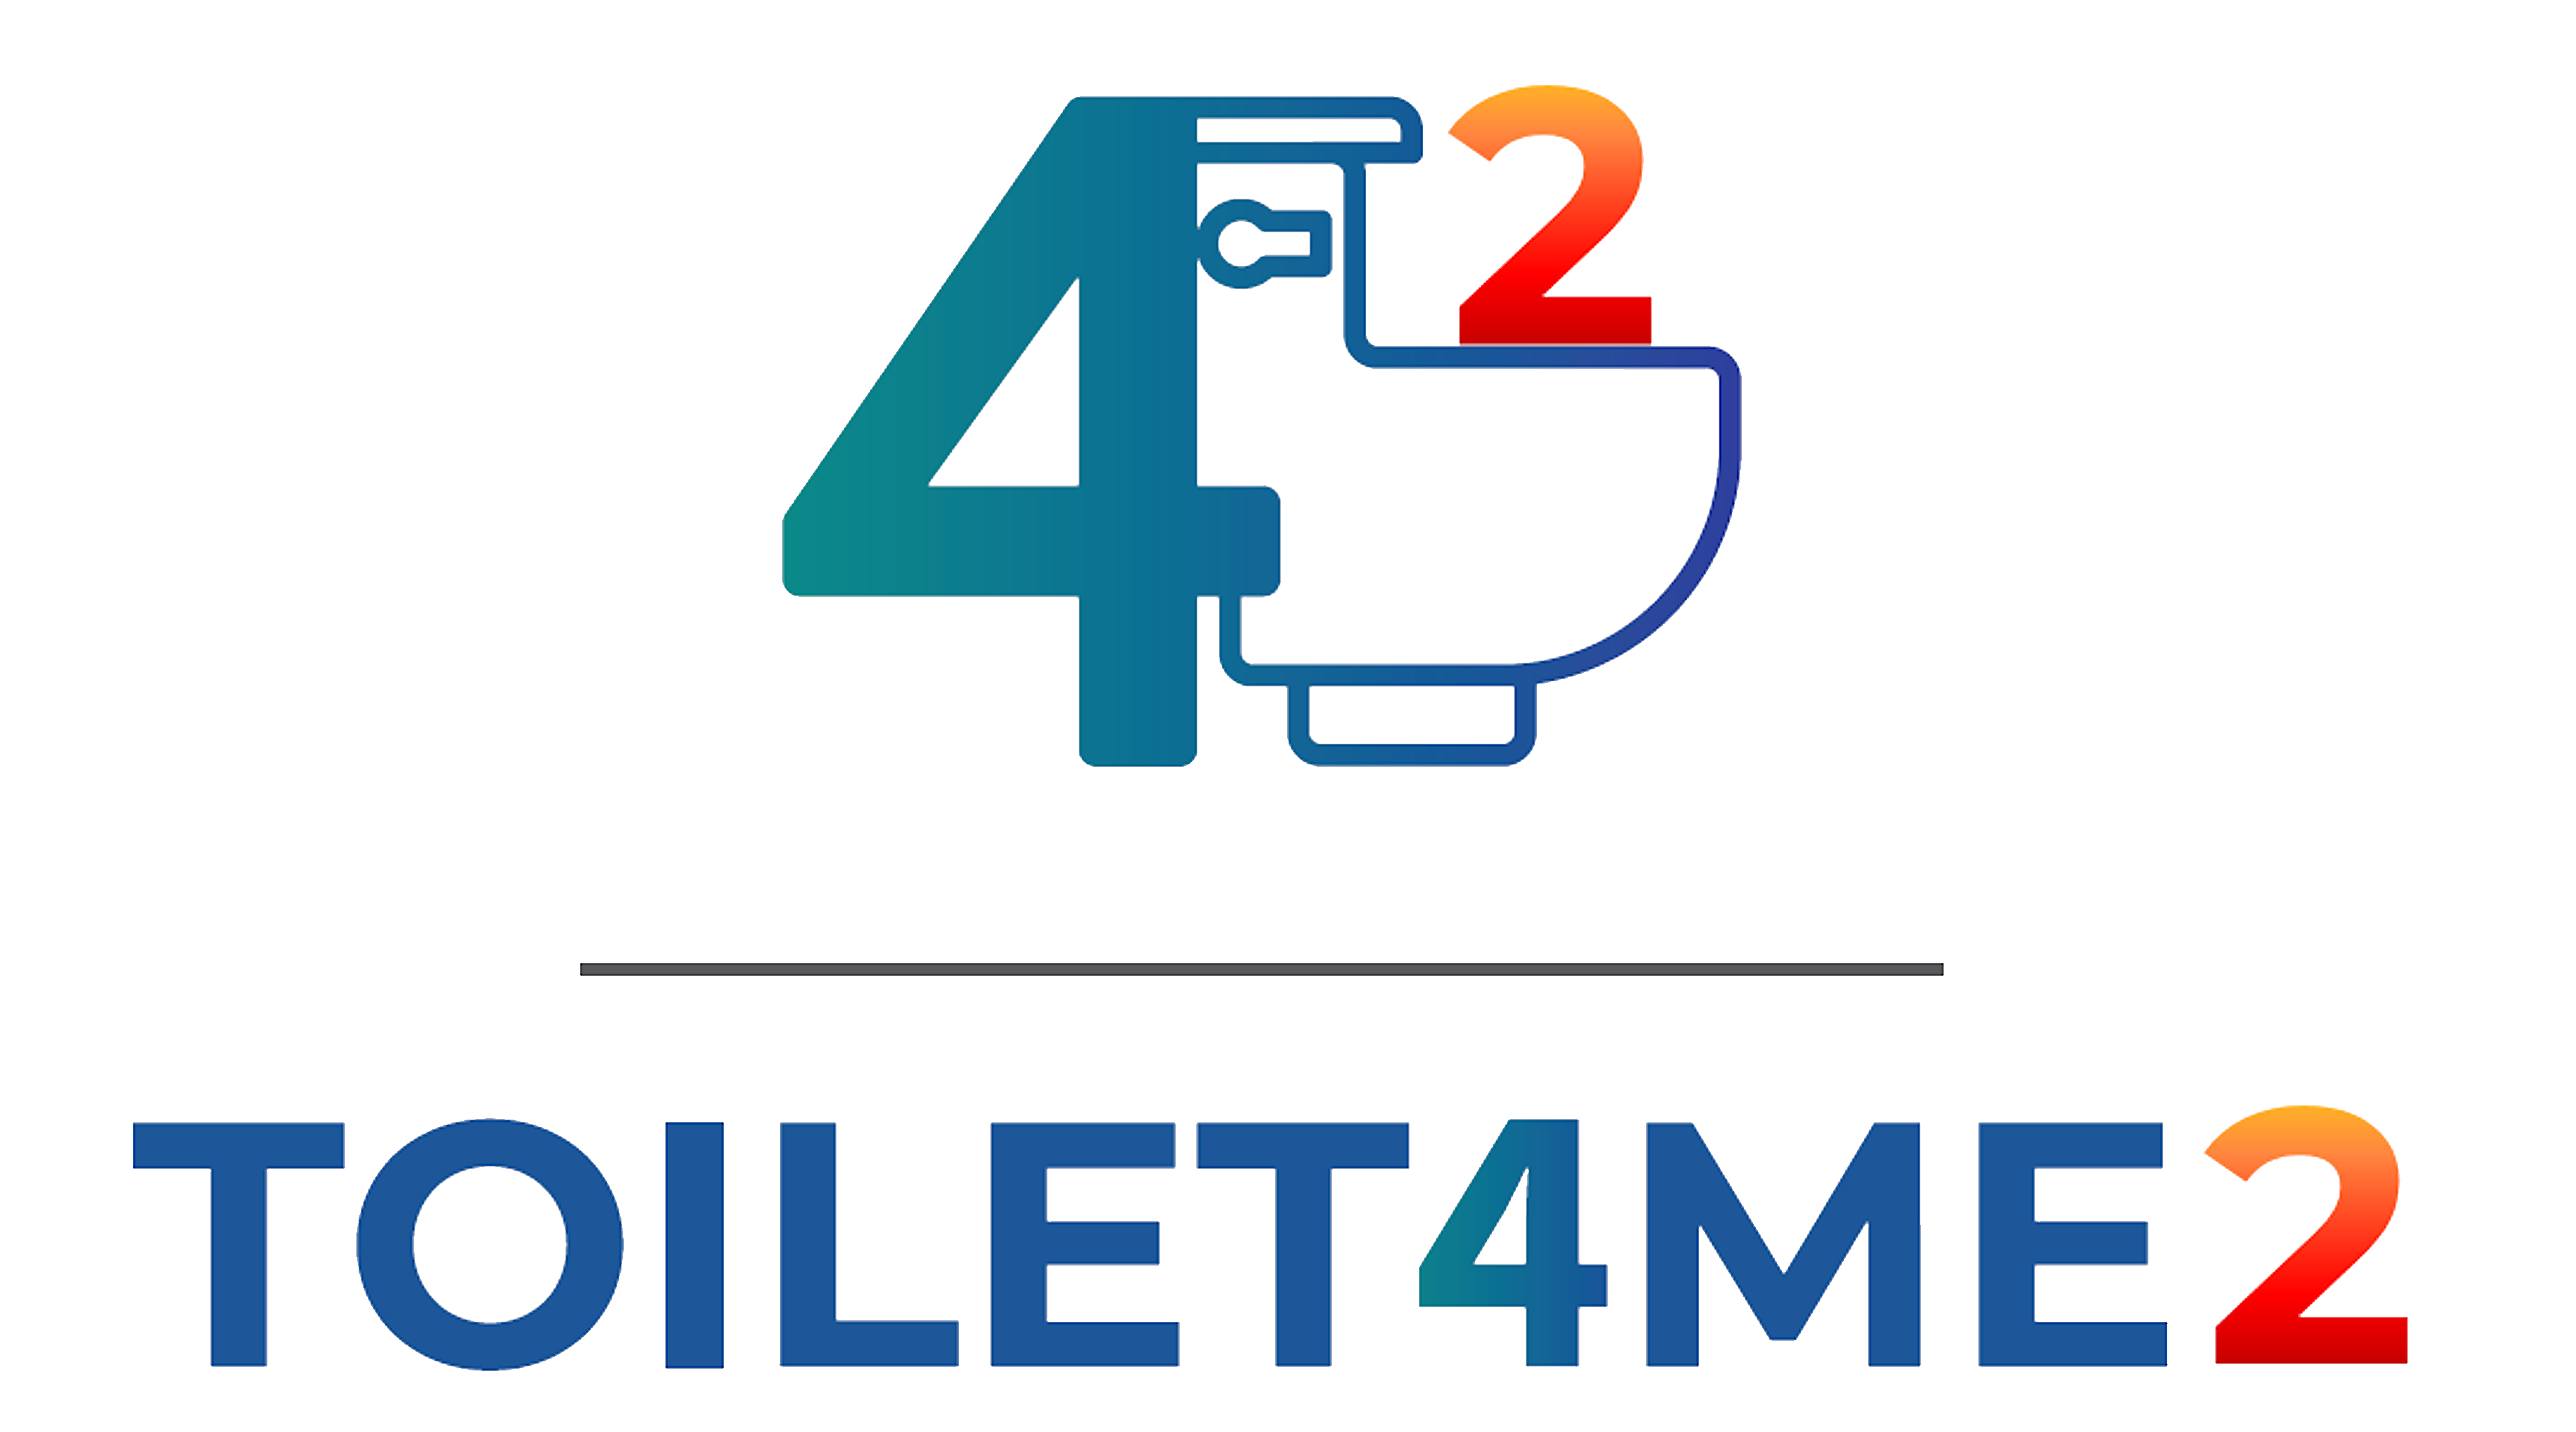 Toilet4me2 logo - active and assisted living